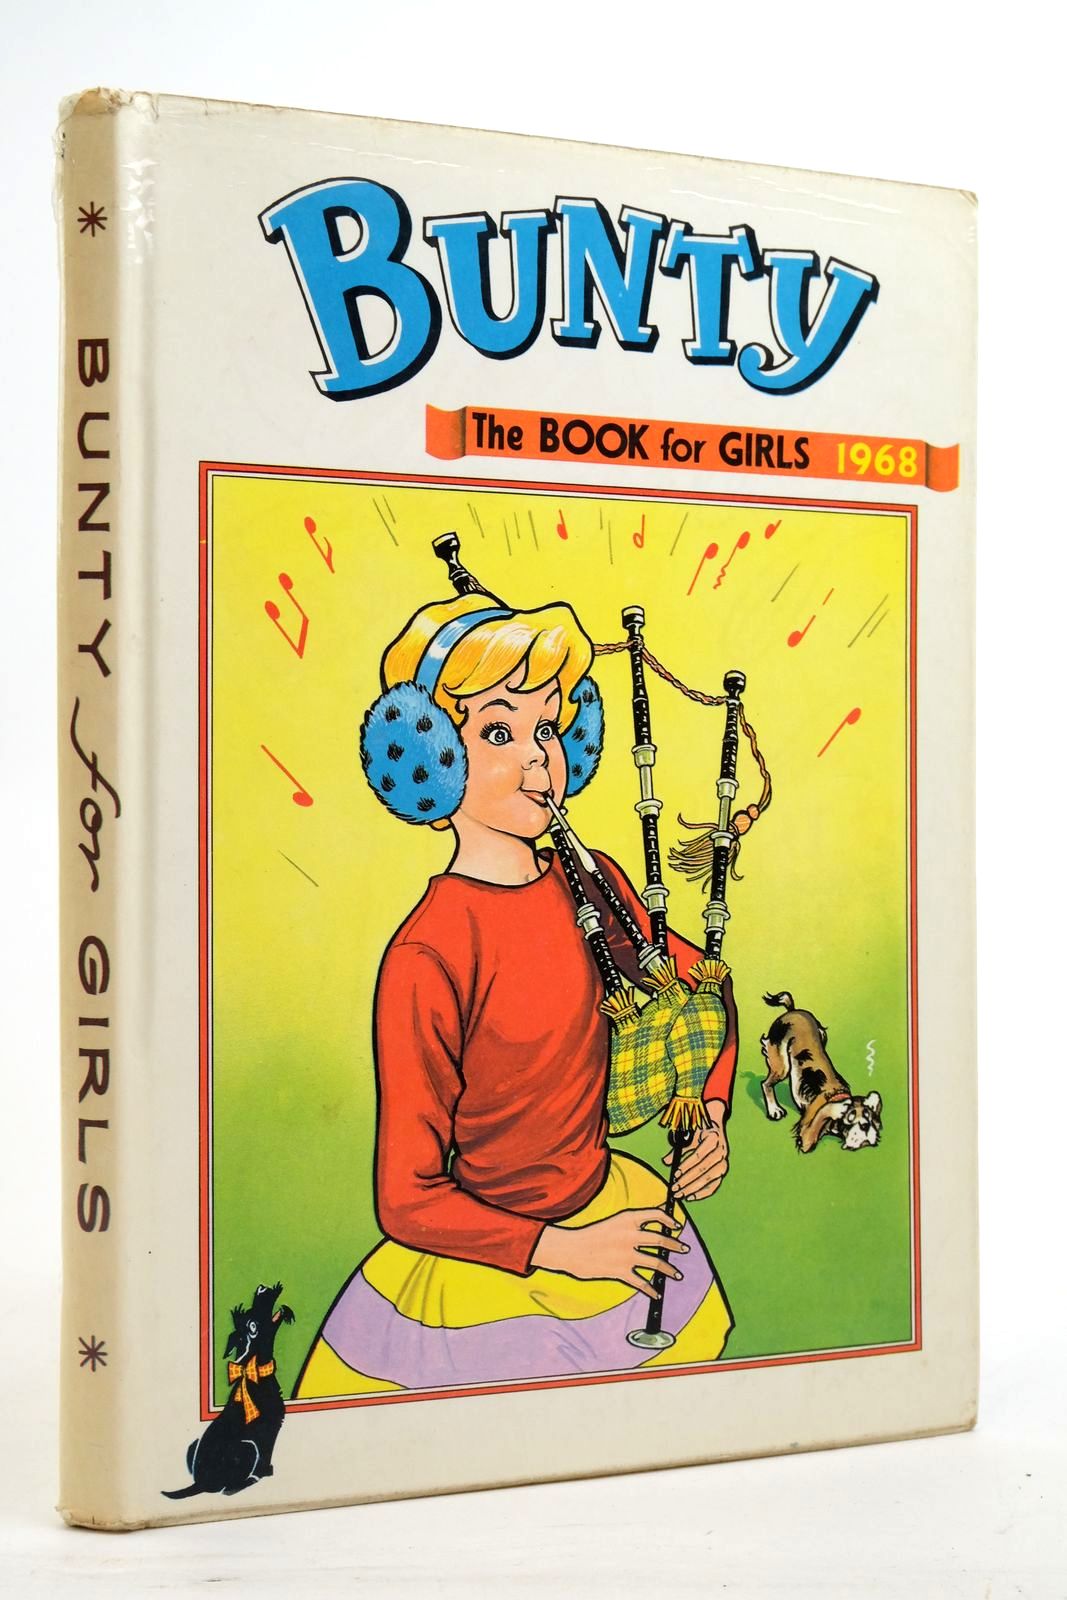 Photo of BUNTY FOR GIRLS 1968 published by D.C. Thomson &amp; Co Ltd. (STOCK CODE: 2138026)  for sale by Stella & Rose's Books